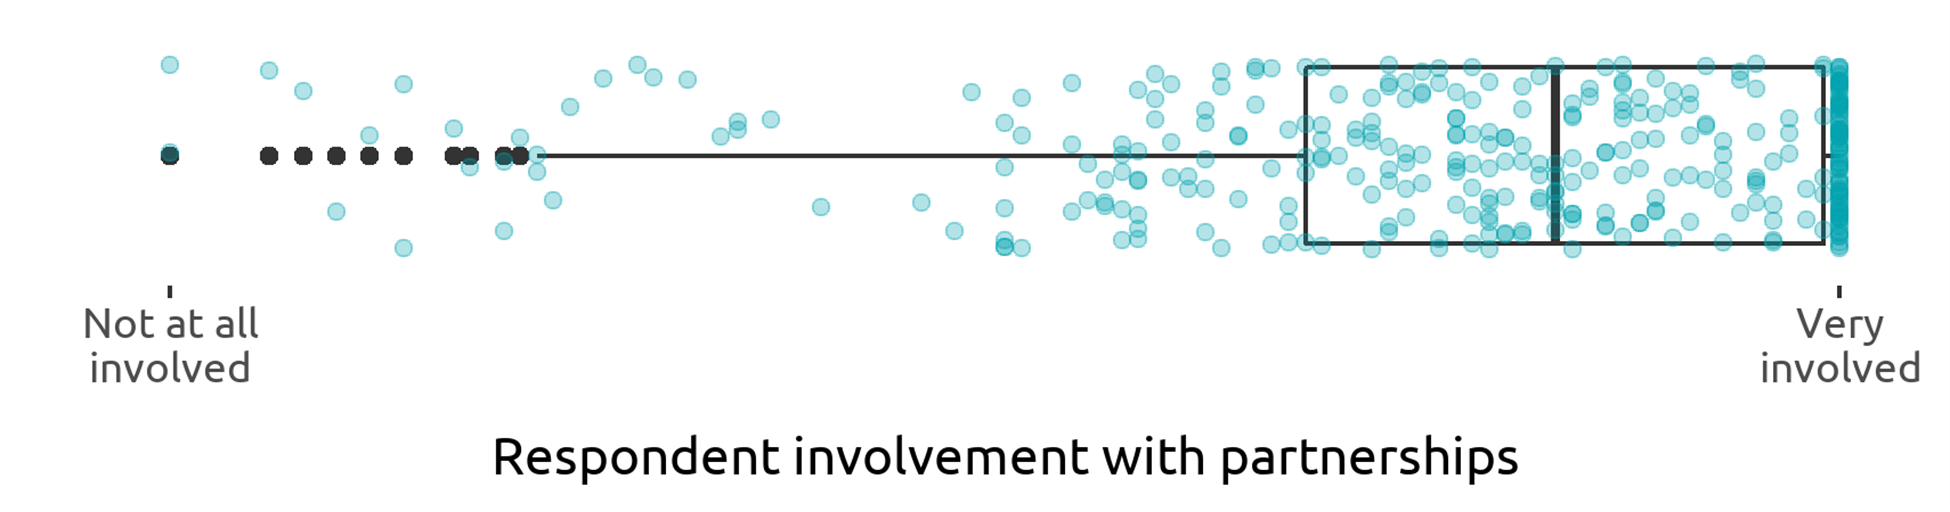 Scatterplot showing respondent involvement with partnerships